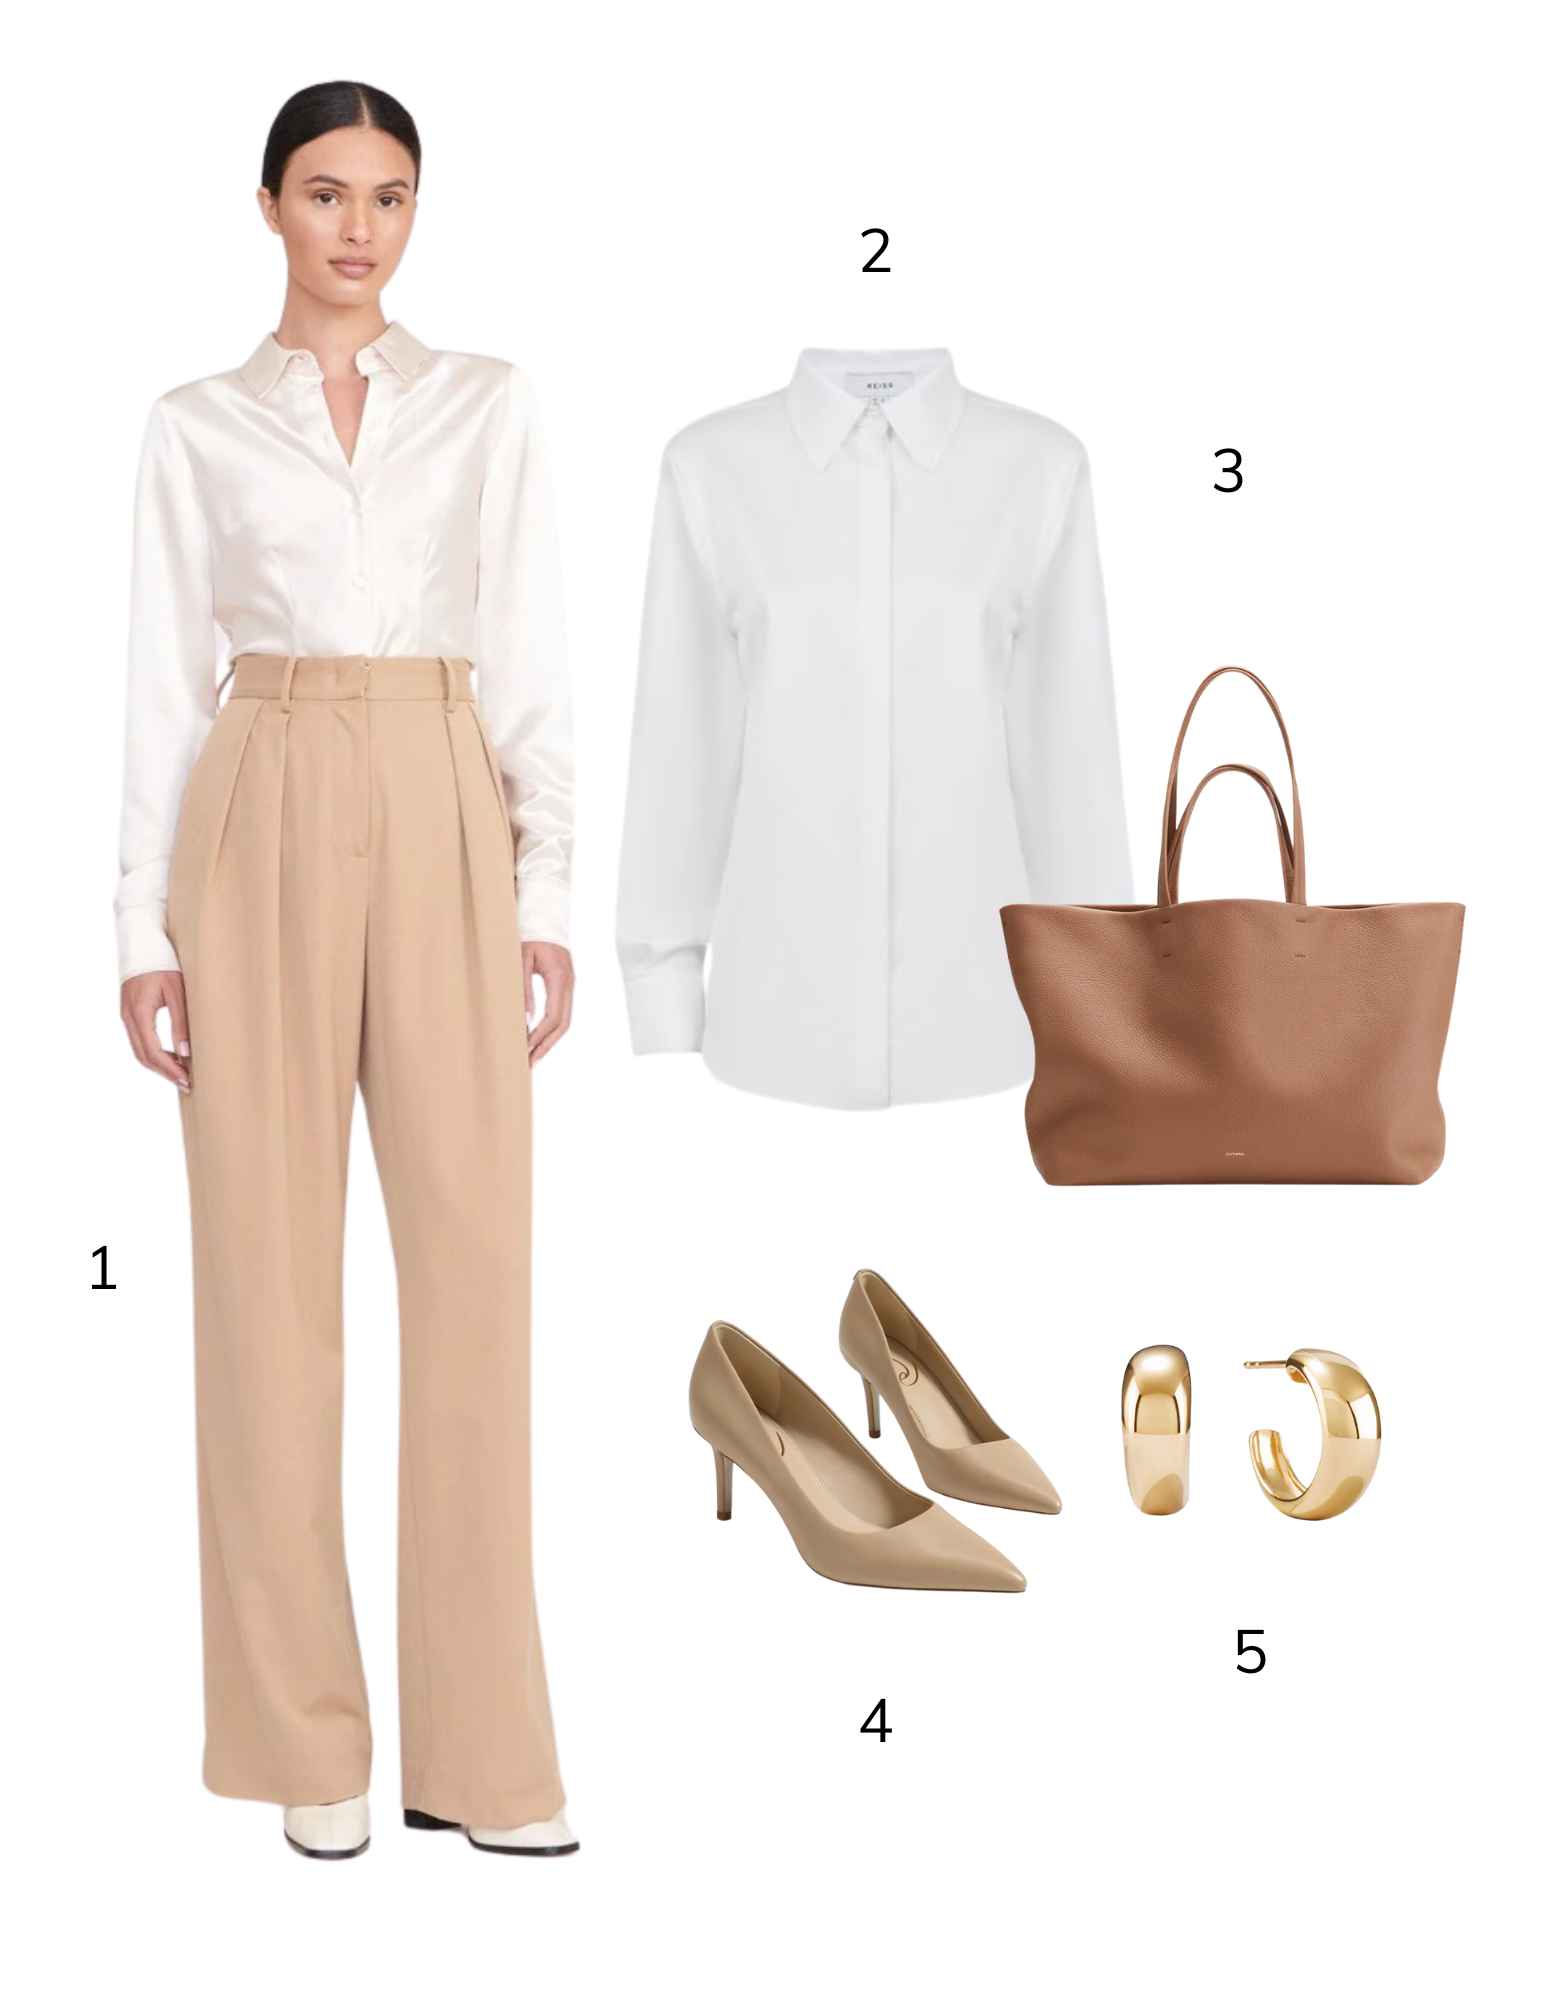 How to Wear Khaki Pants ? 22 Outfit Ideas for Women  Business casual  outfits, How to wear blazers, Fashion outfits